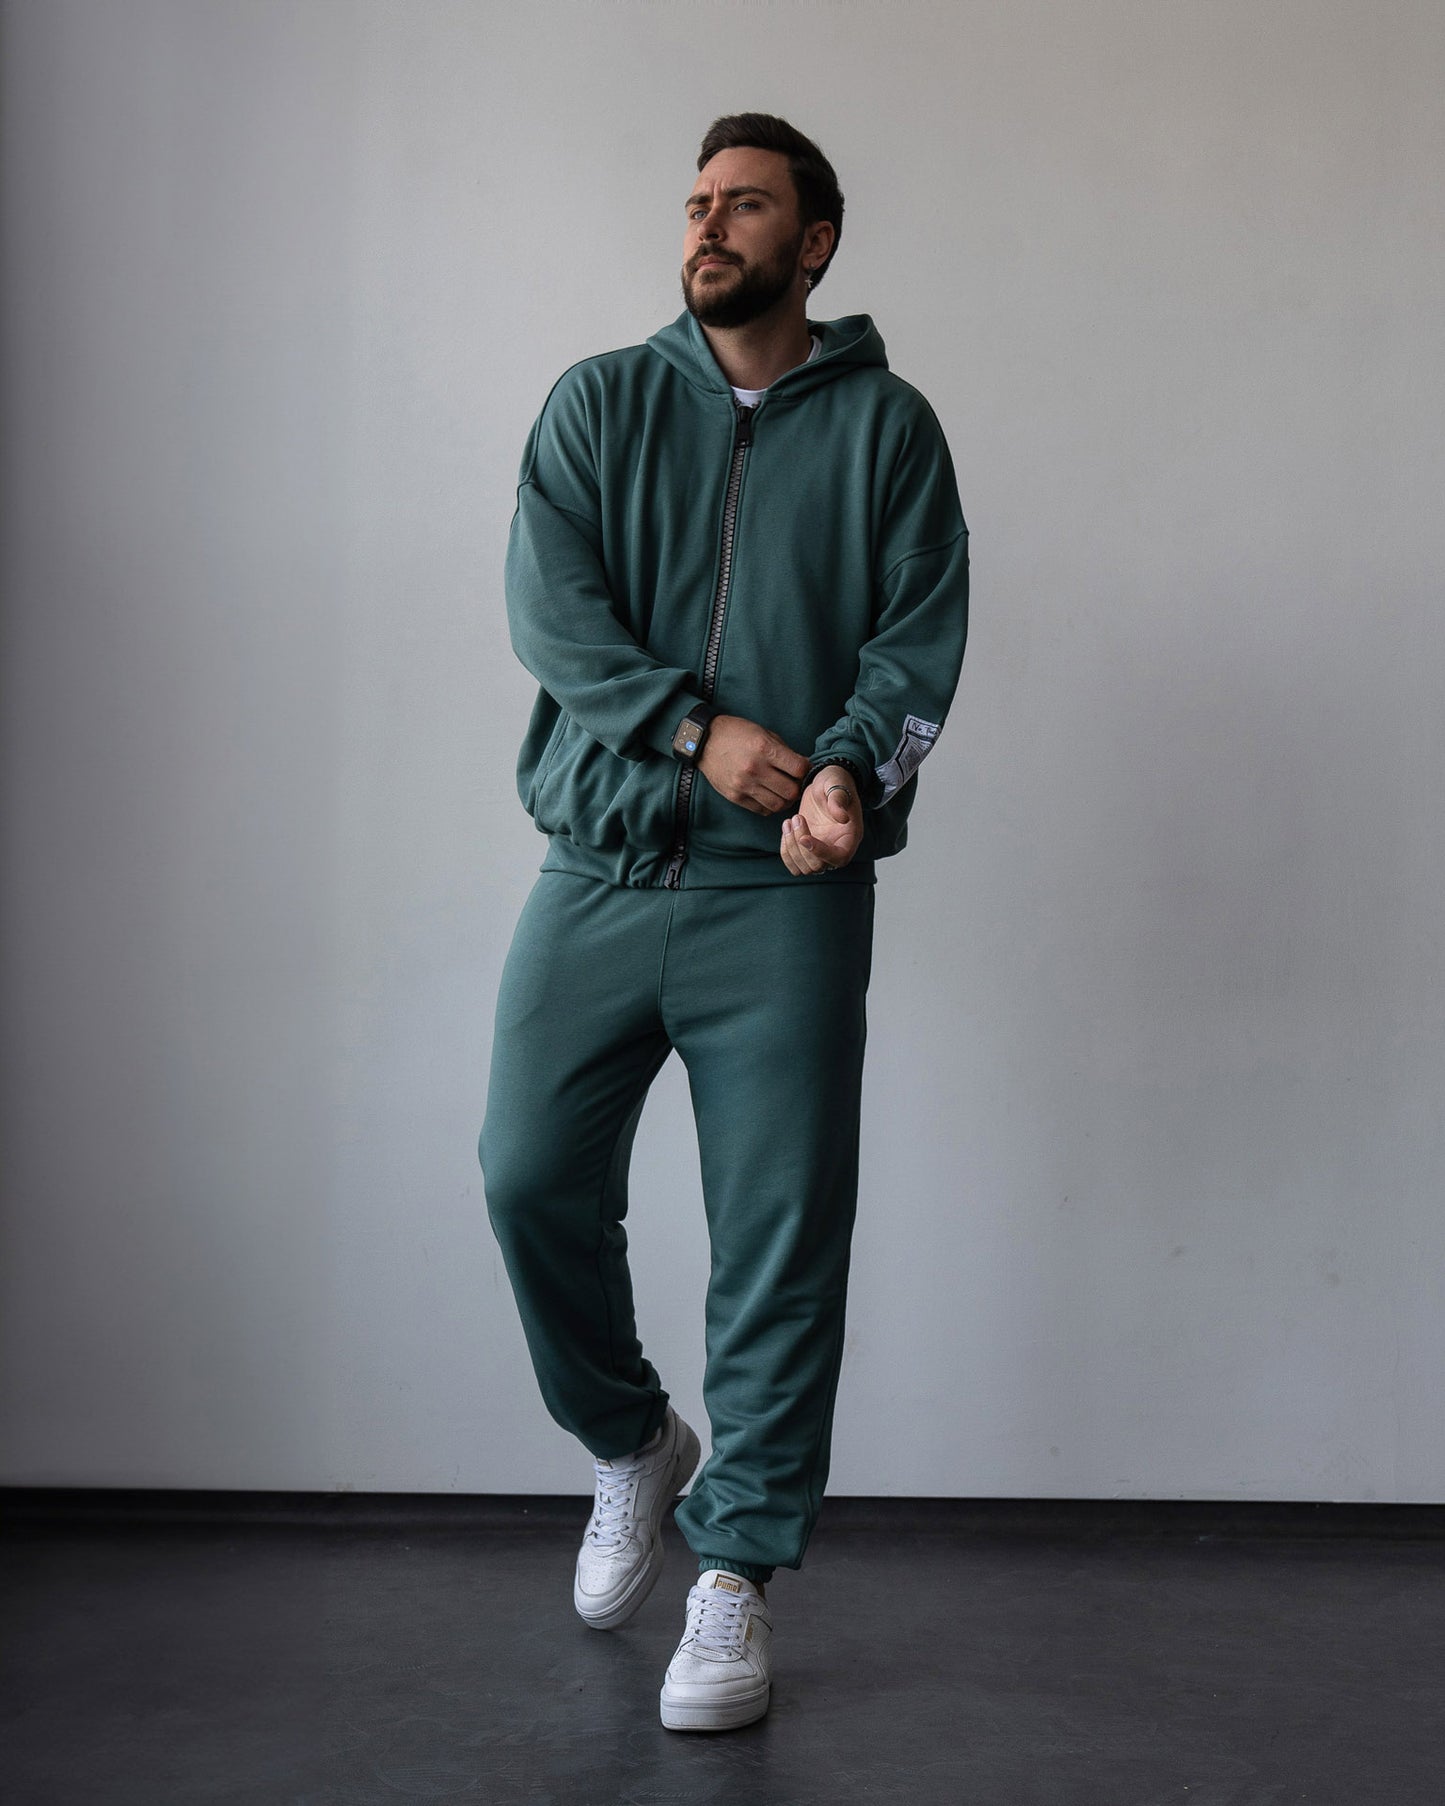 TRACK SUIT "FREEDOM OF STYLE"